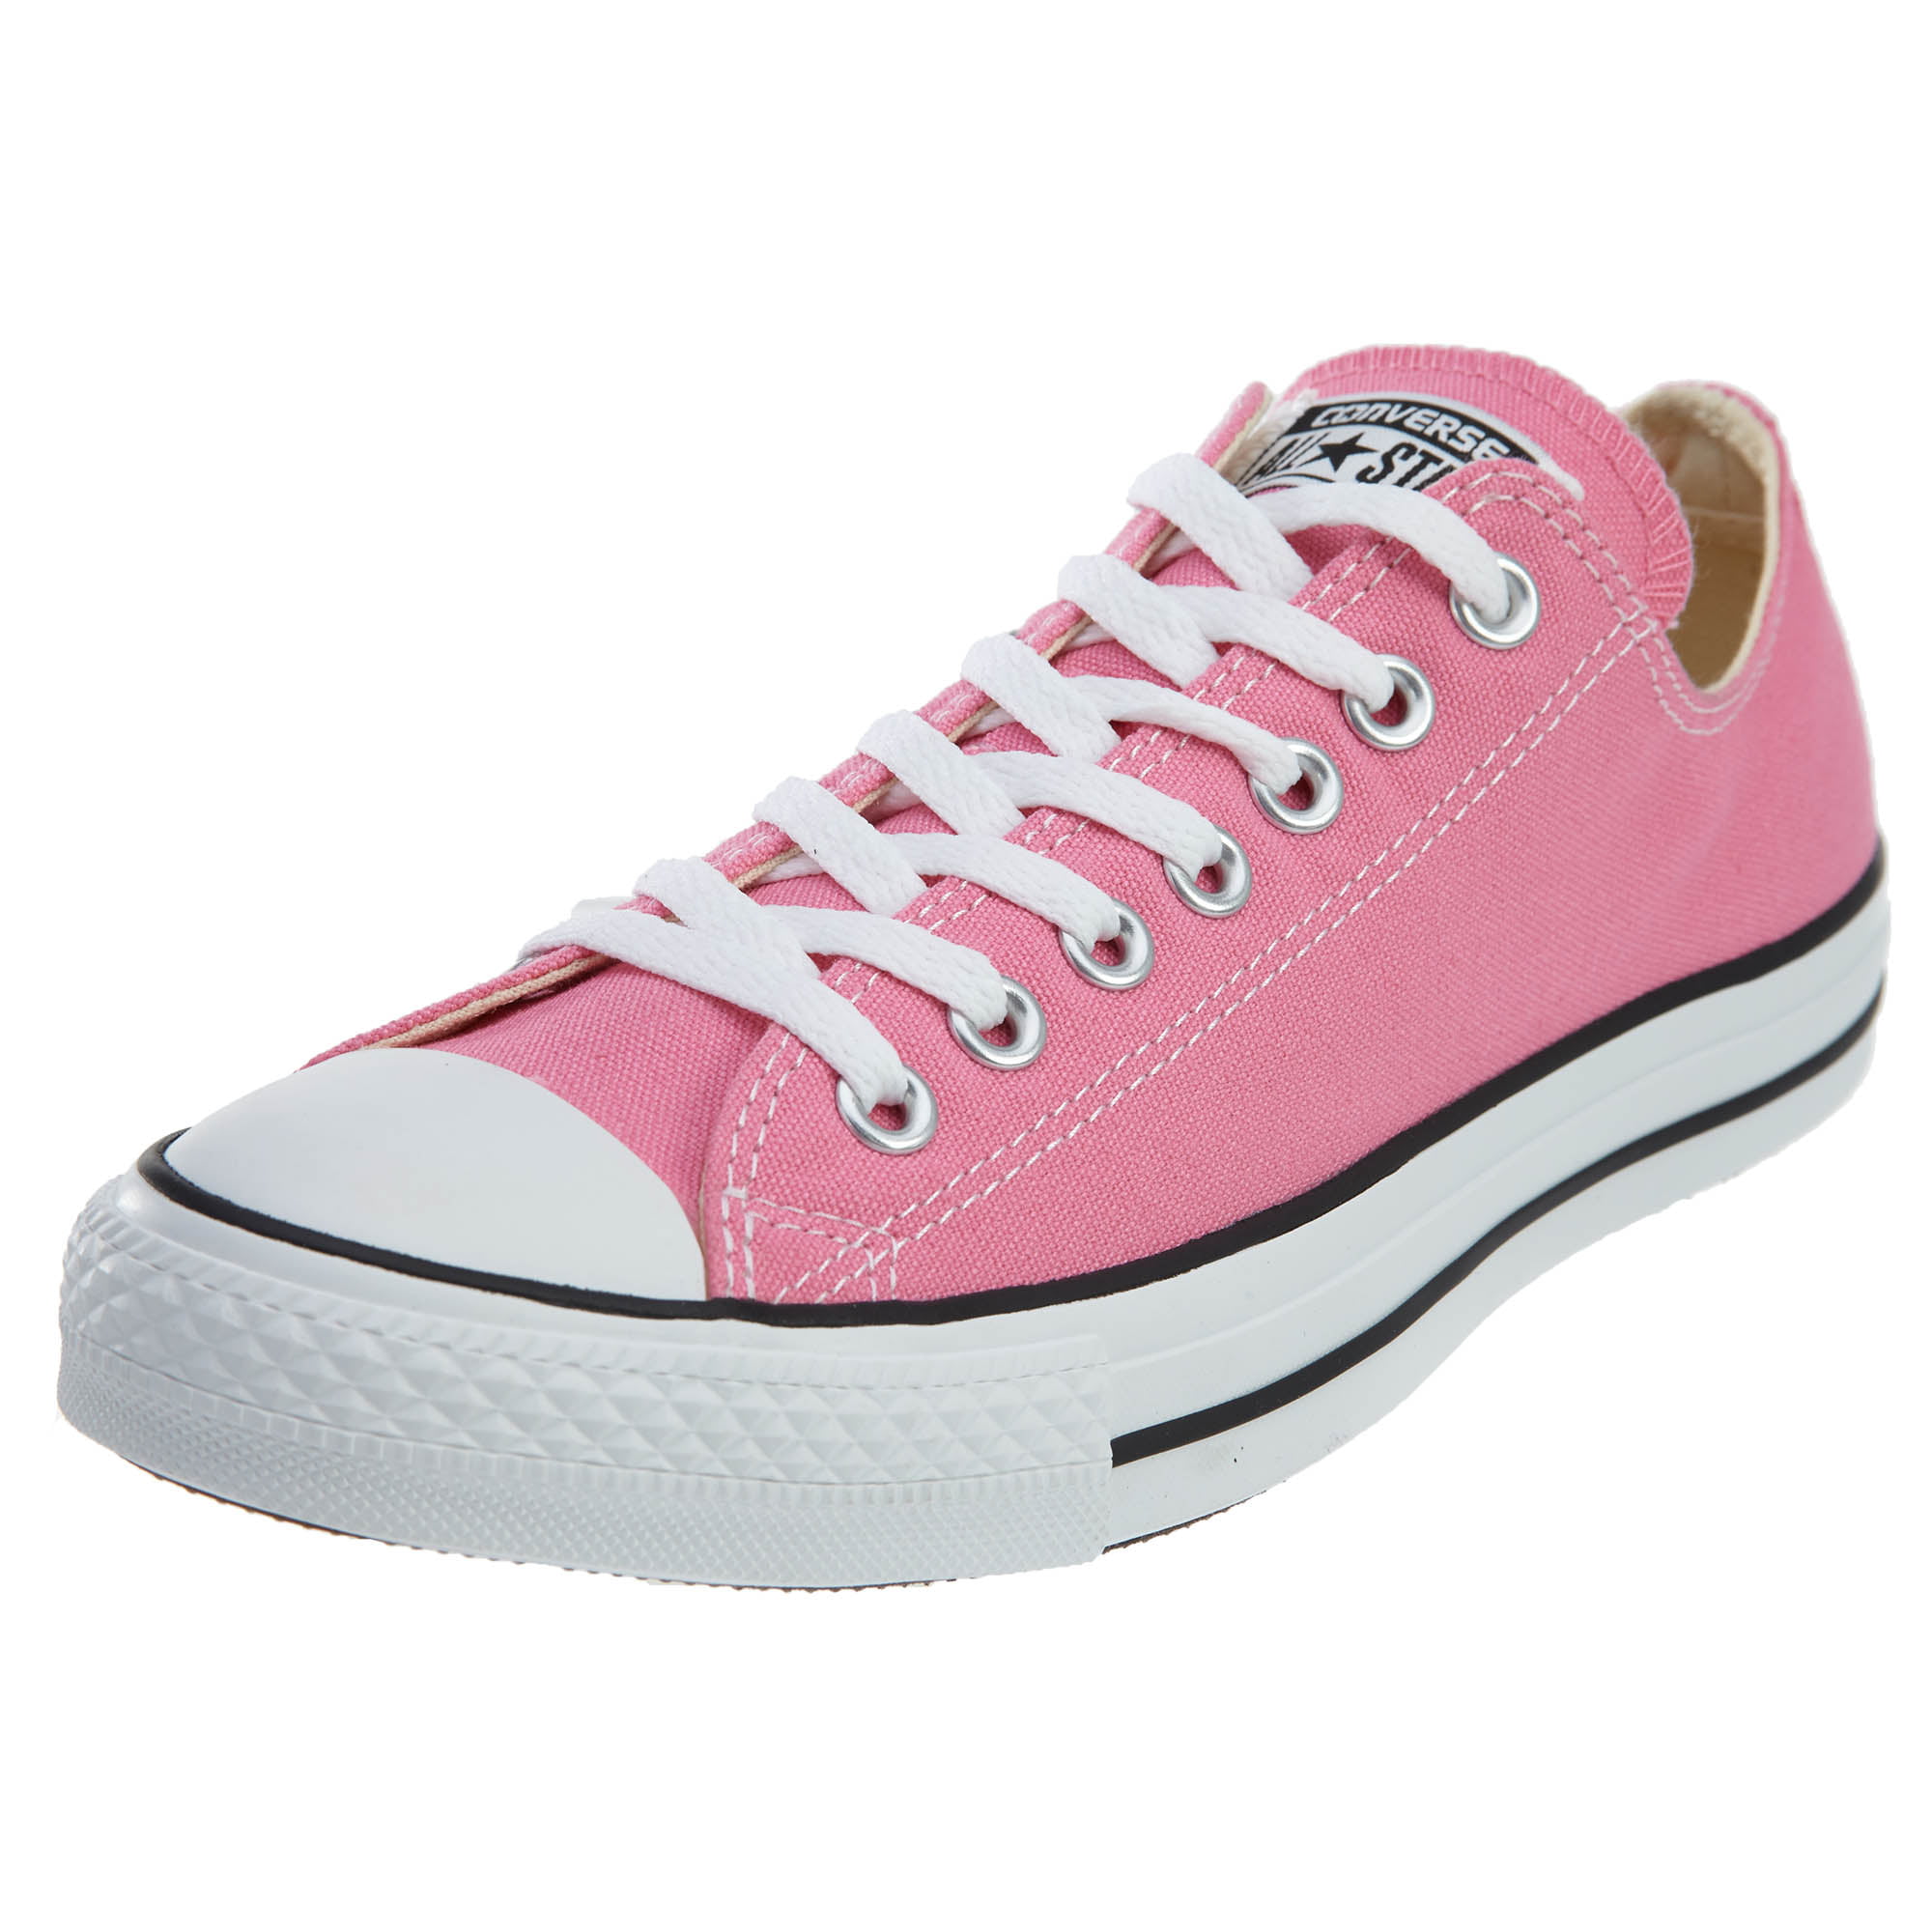 converse-converse-unisex-chuck-taylor-all-star-ox-low-top-classic